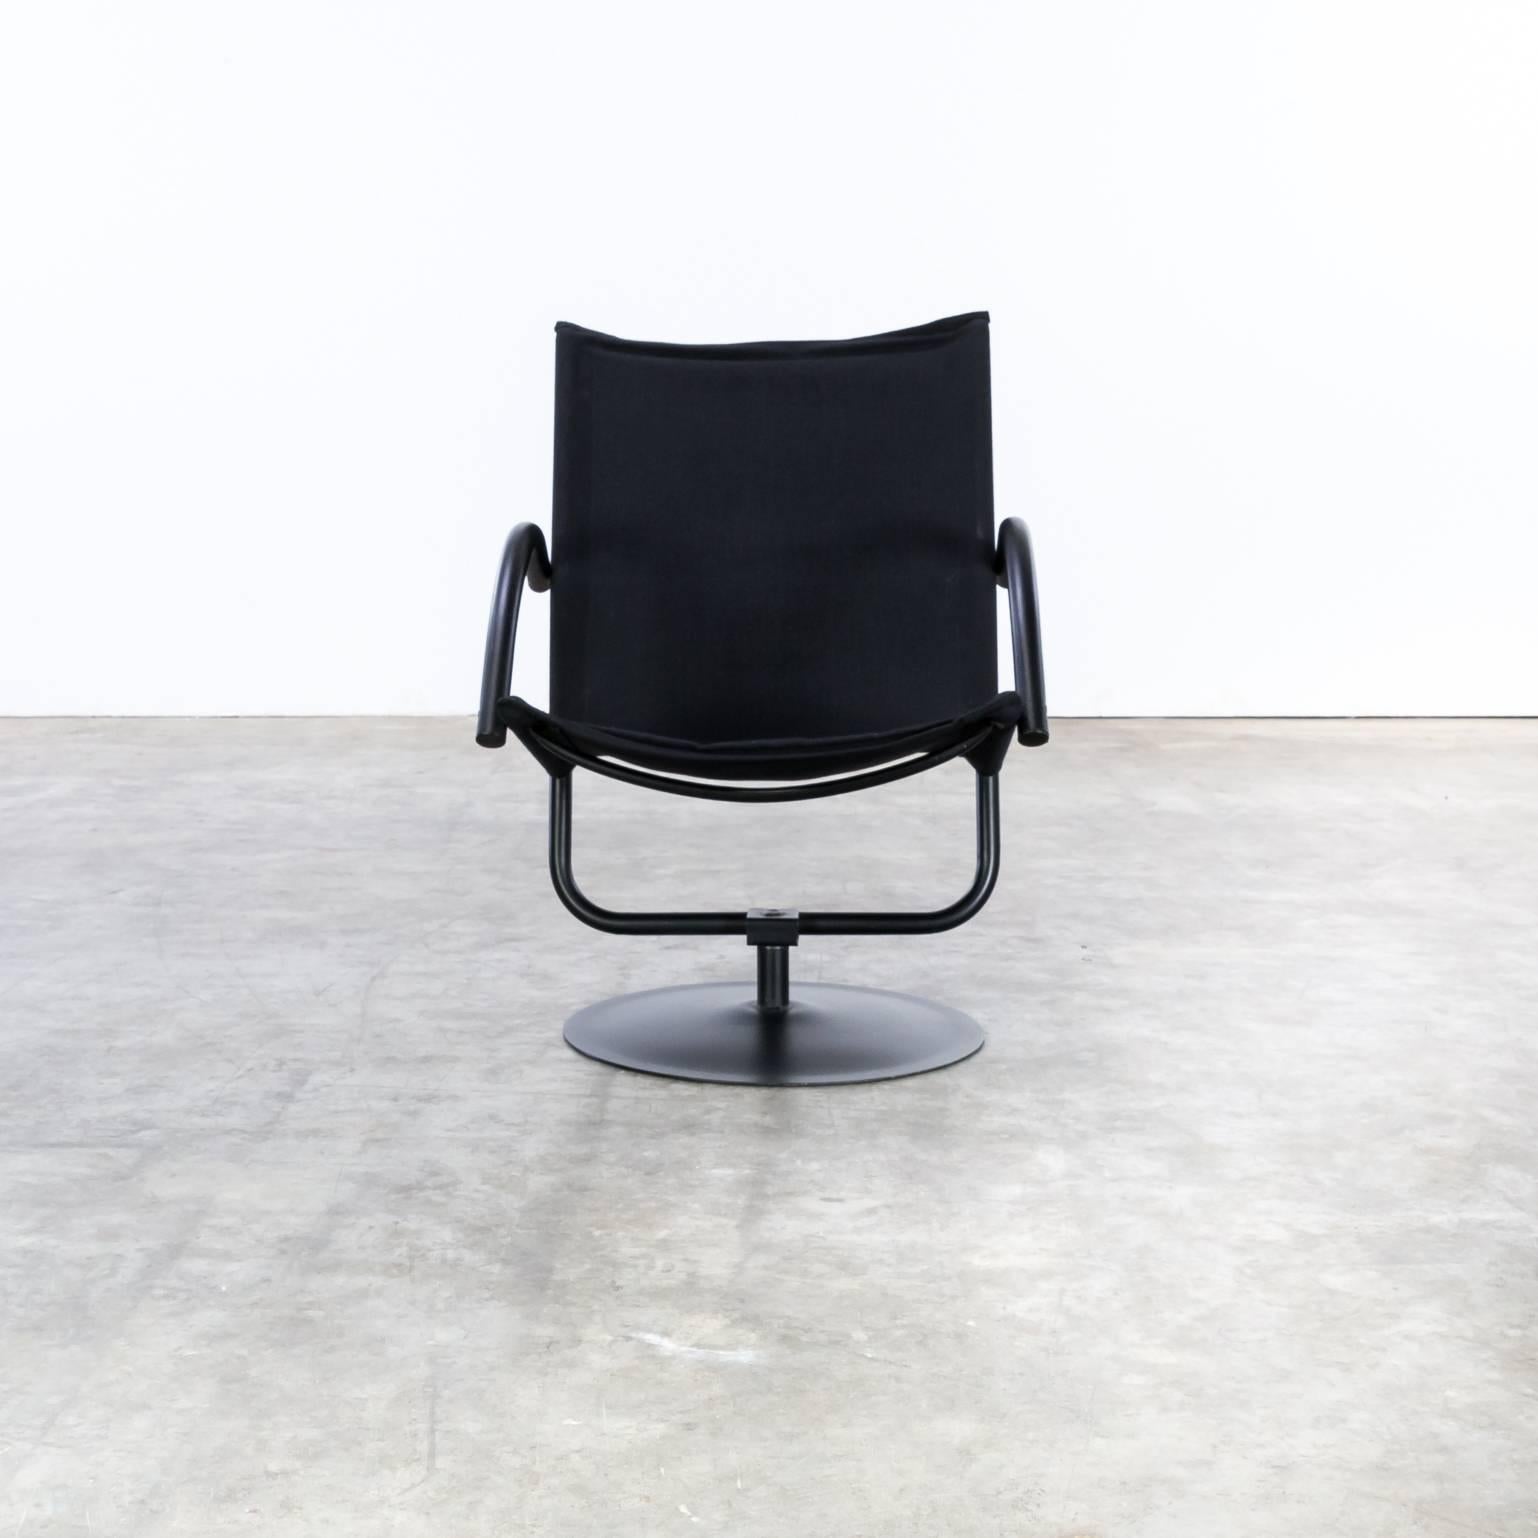 Design swivel chair black canvas fabric attributed to Mazairac & Boonzaaier. Good condition, wear consistent with age and use.